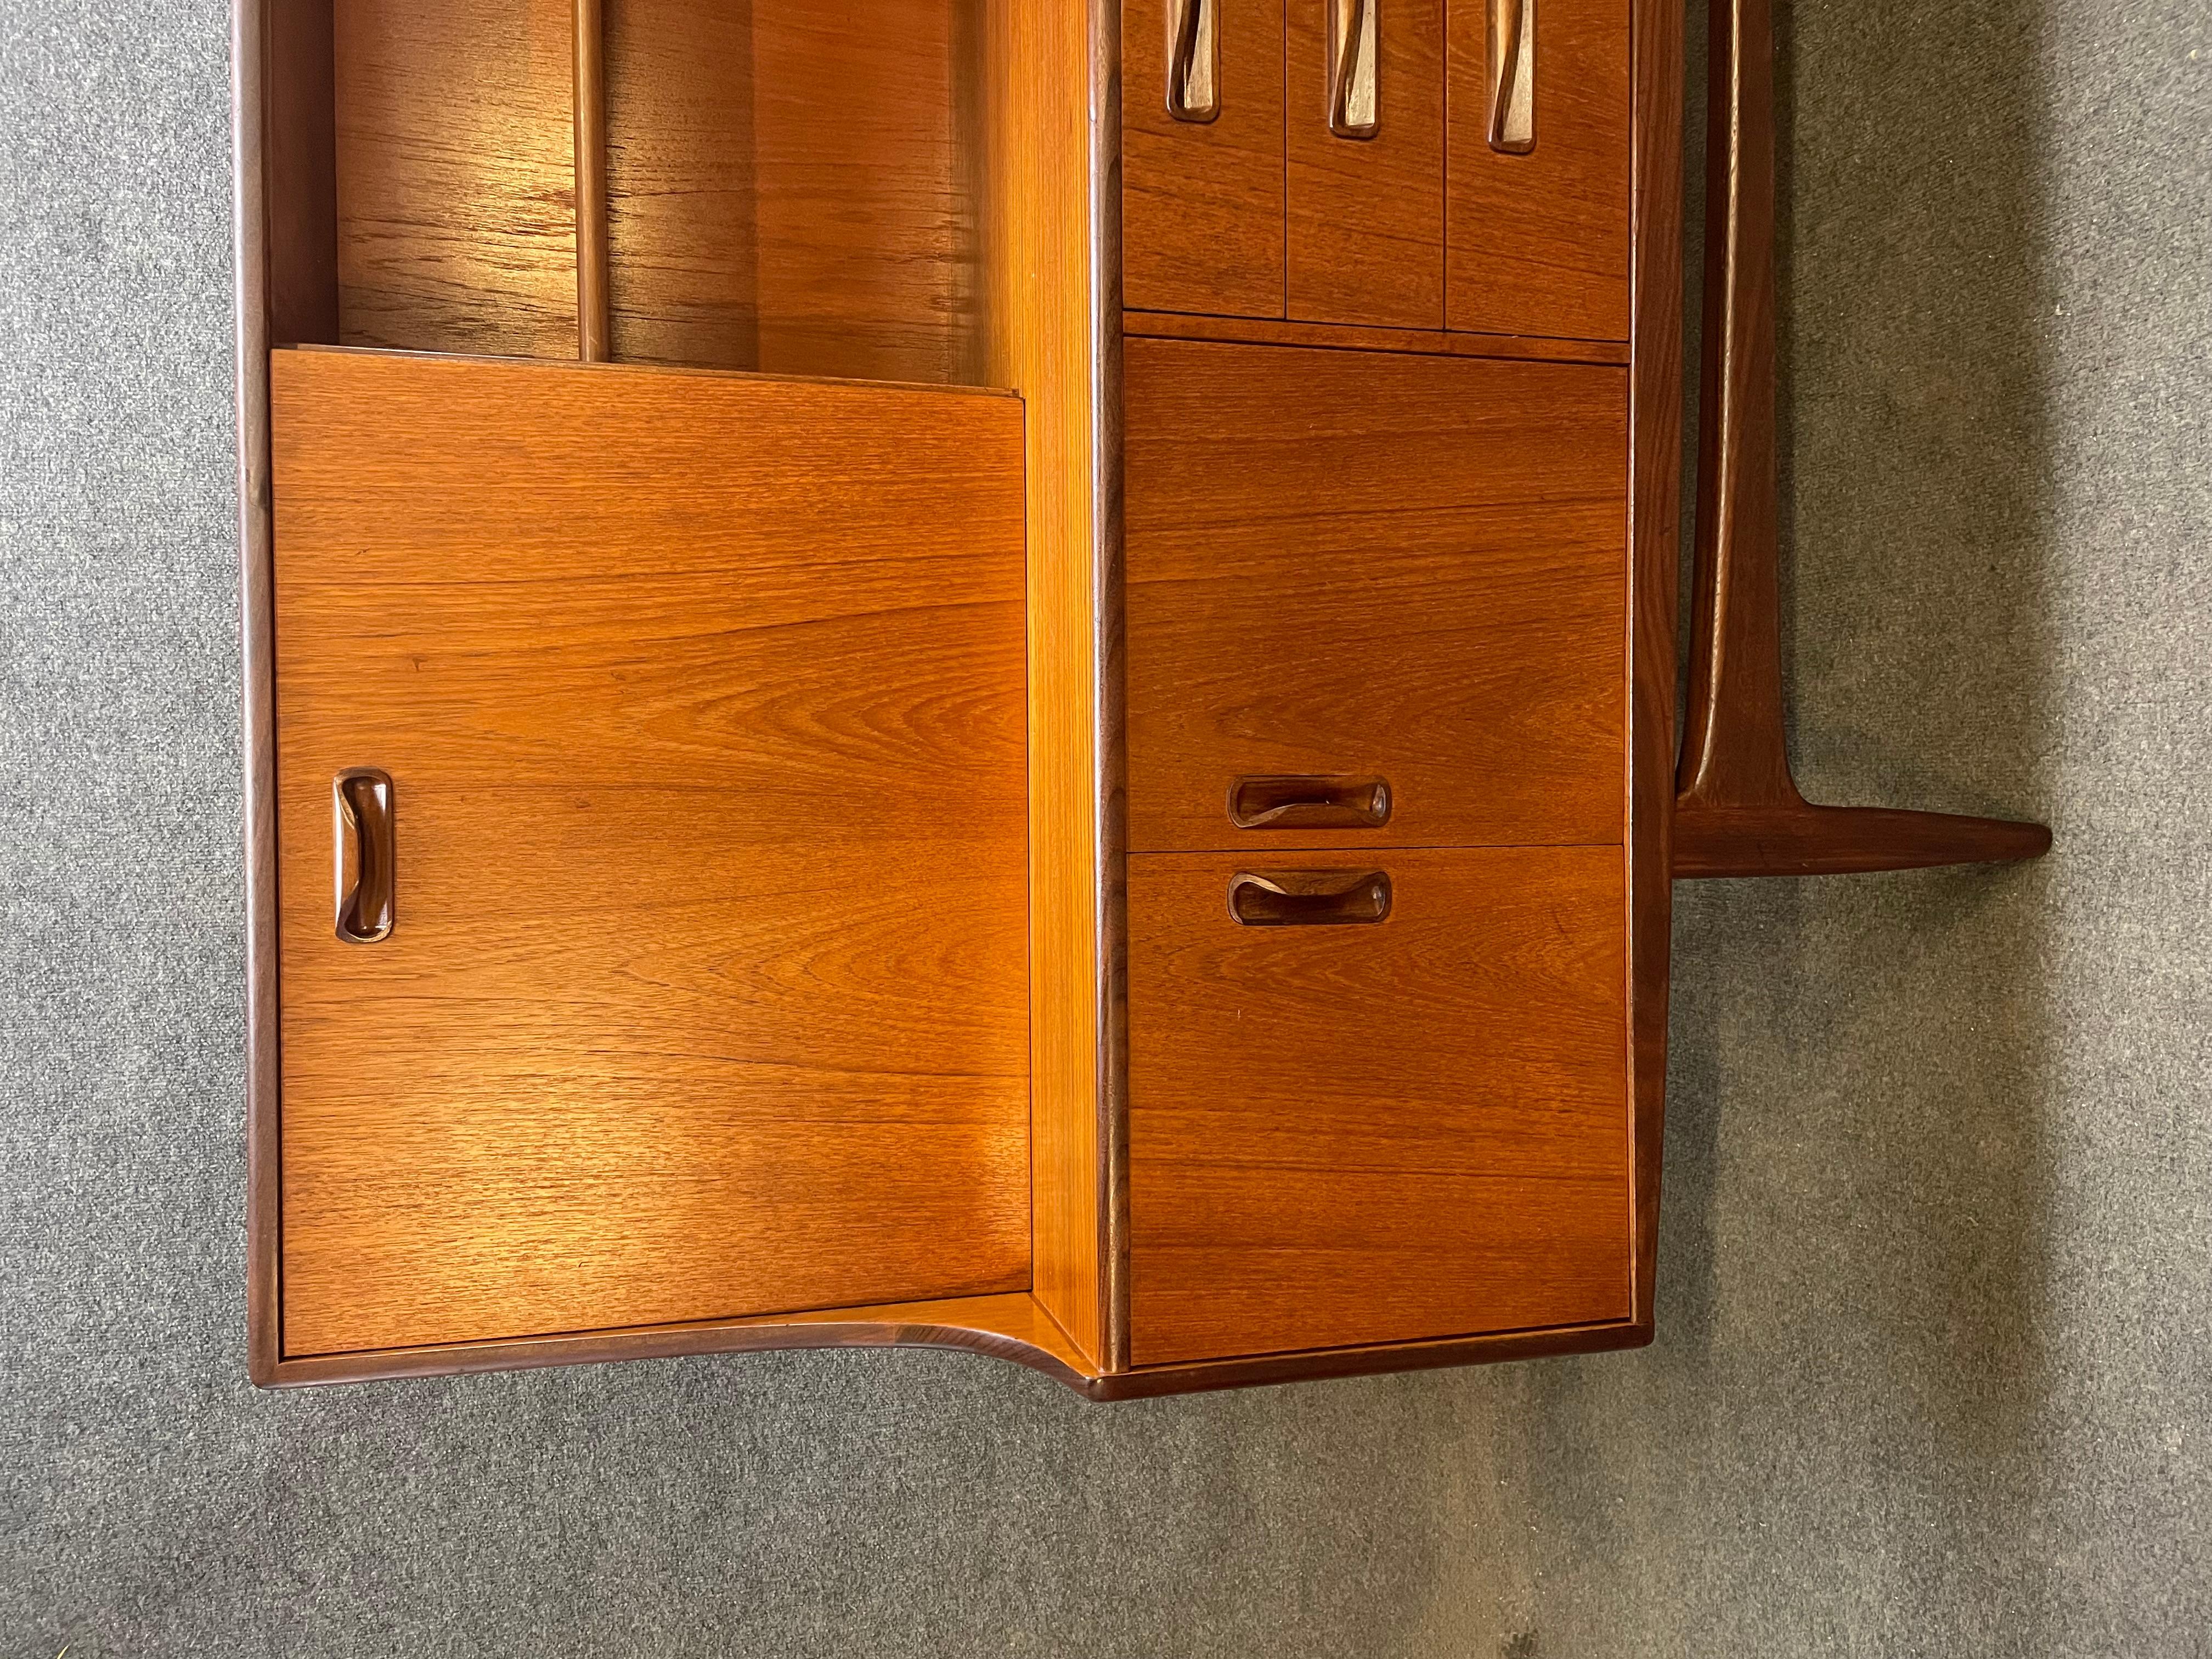 Here is a beautiful British Mid-Century Modern tall sideboard in teak wood designed by Victor Wilkins for the 